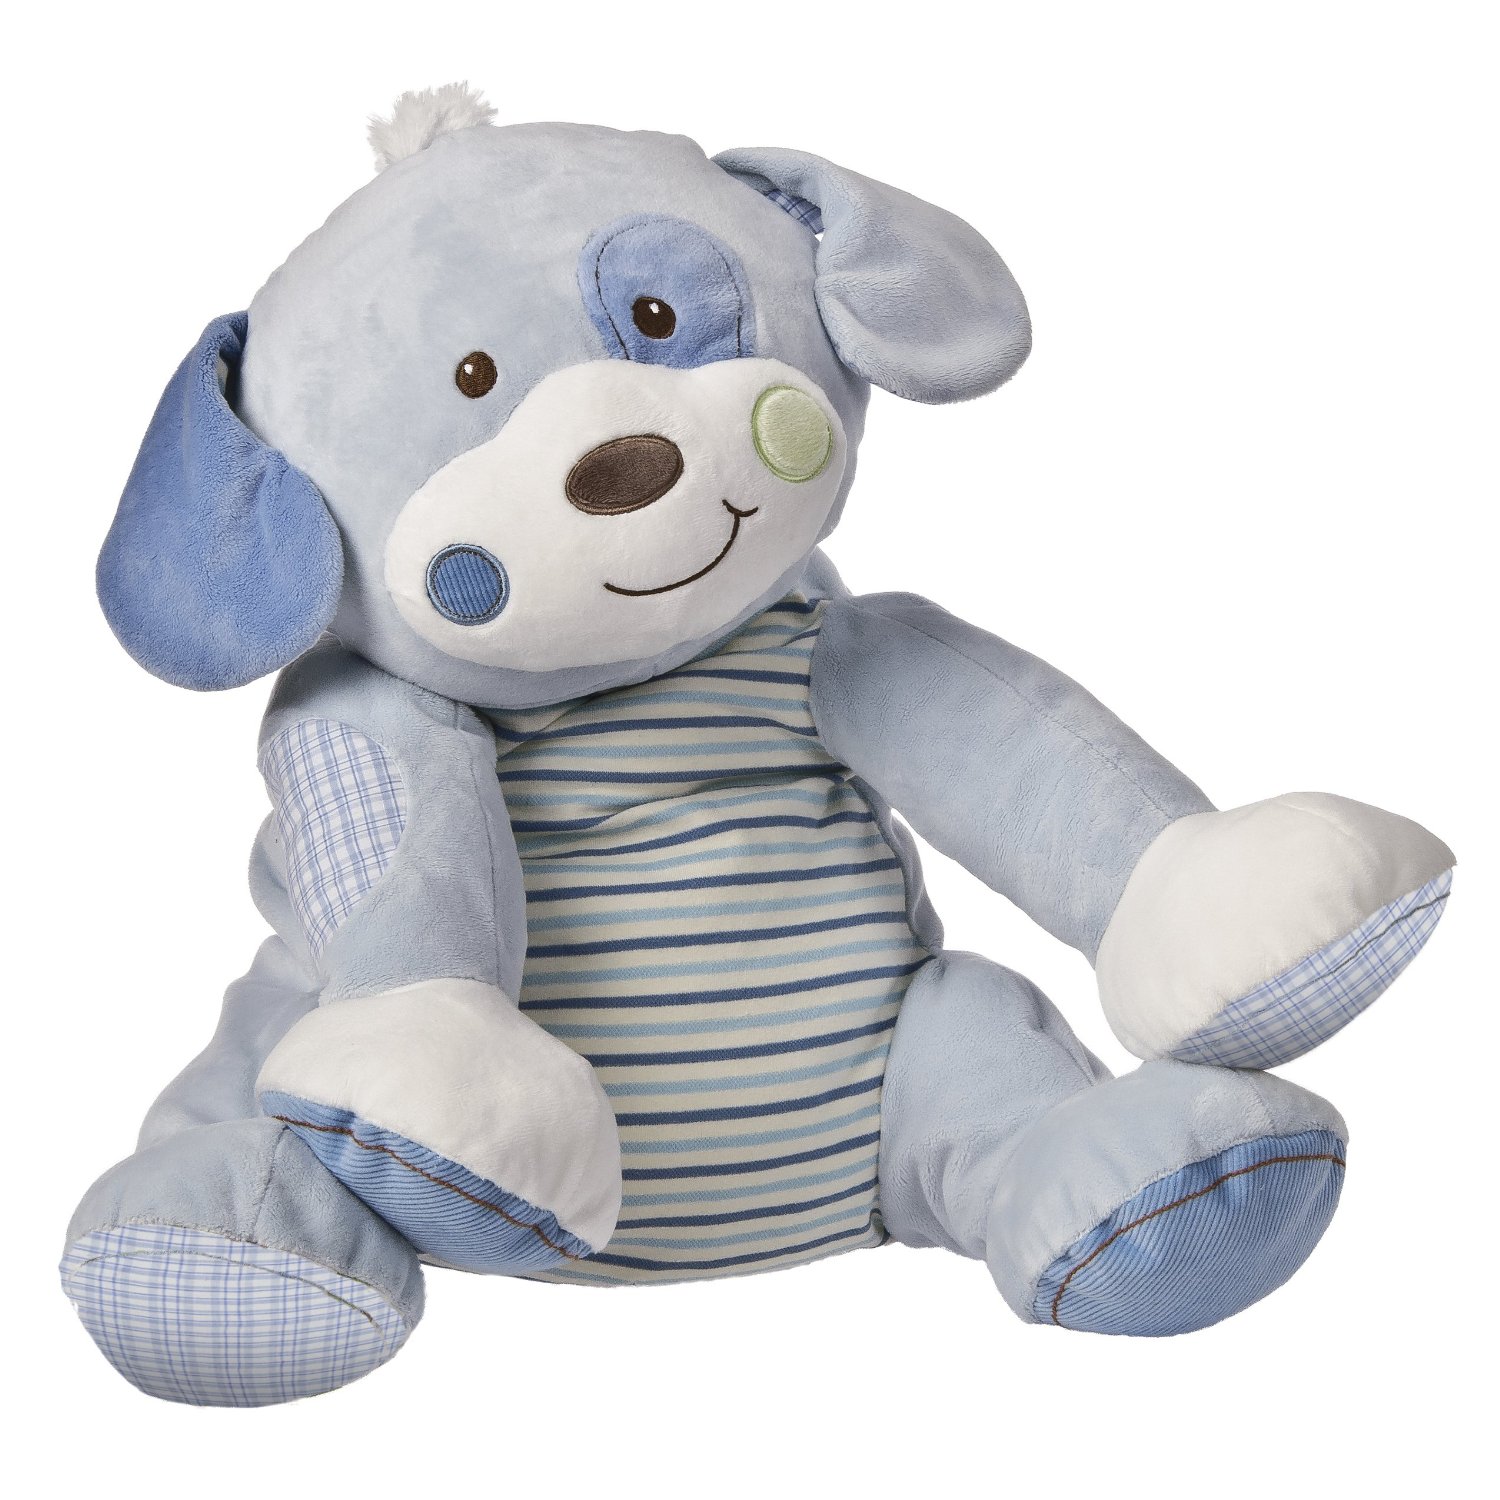 Personalized Gifts | Baby Gifts | Woof Woof Puppy Soft Toy